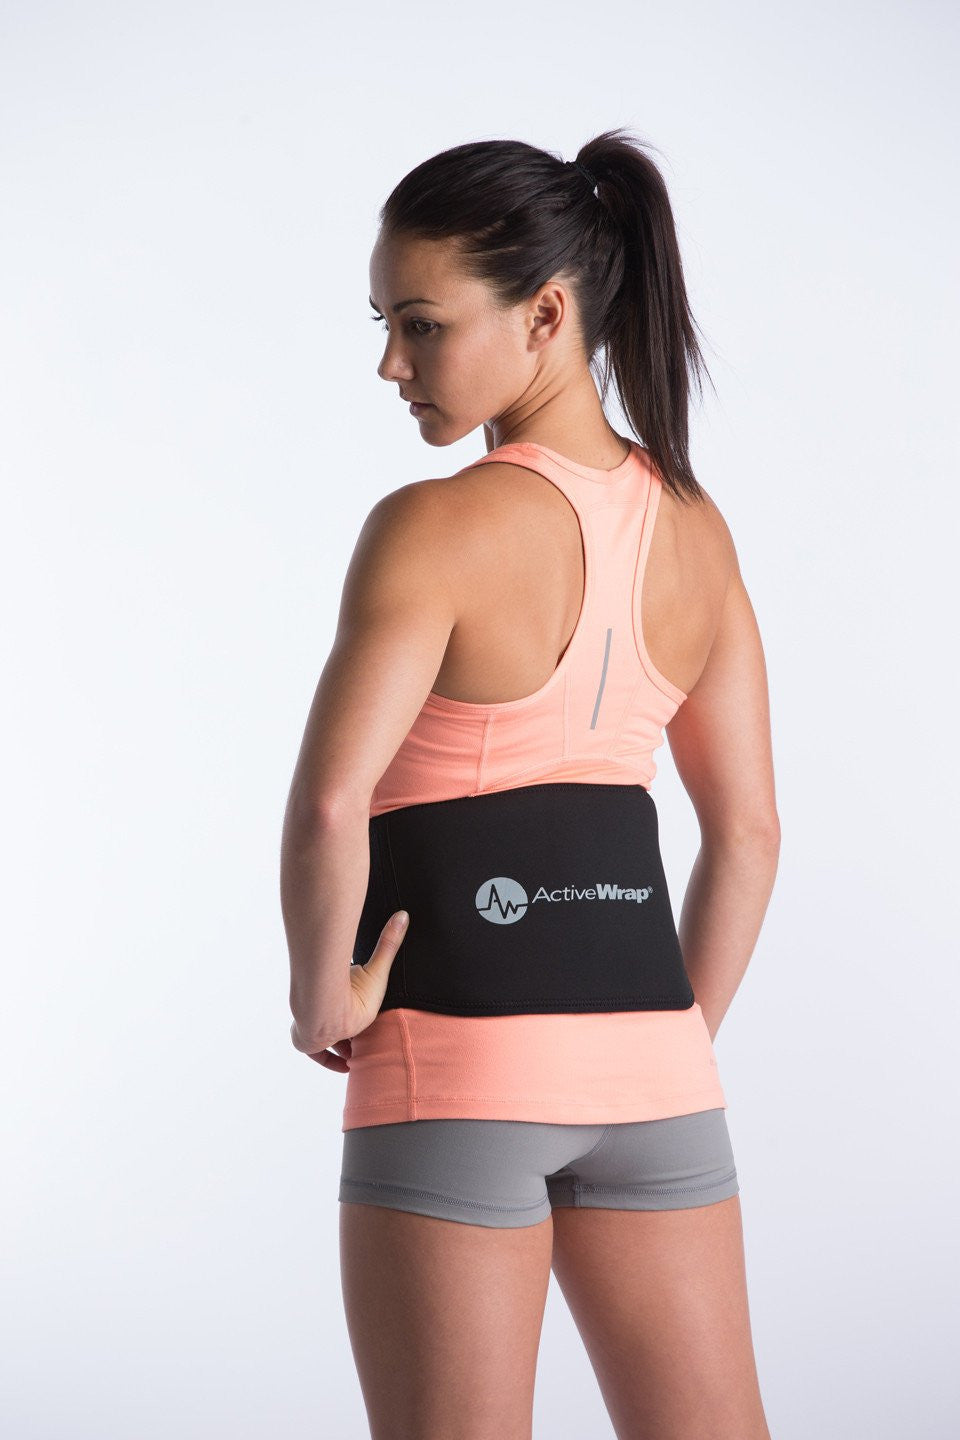 Heated Back Wrap/Ice Pack for Back (All in 1)